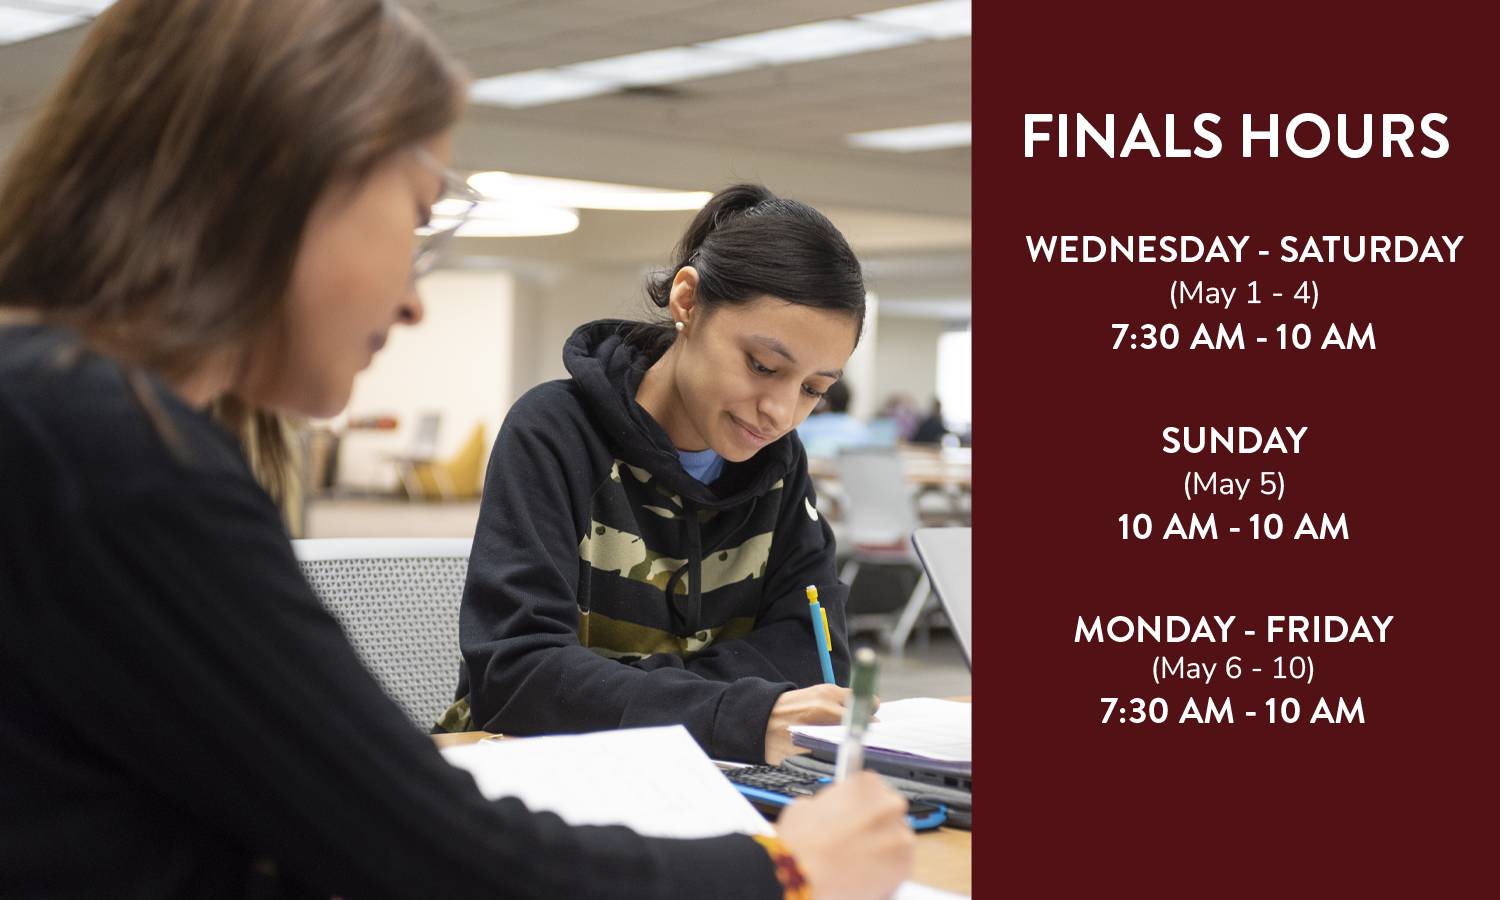 FINALS HOURS, Wednesday - Saturday (May 1-4) 7:30 a.m. - 1 a.m.; Sunday (May 5) 10 a.m. - 1 a.m.; Monday - Friday (May 6-10) 7:30 a.m. - 1 a.m.